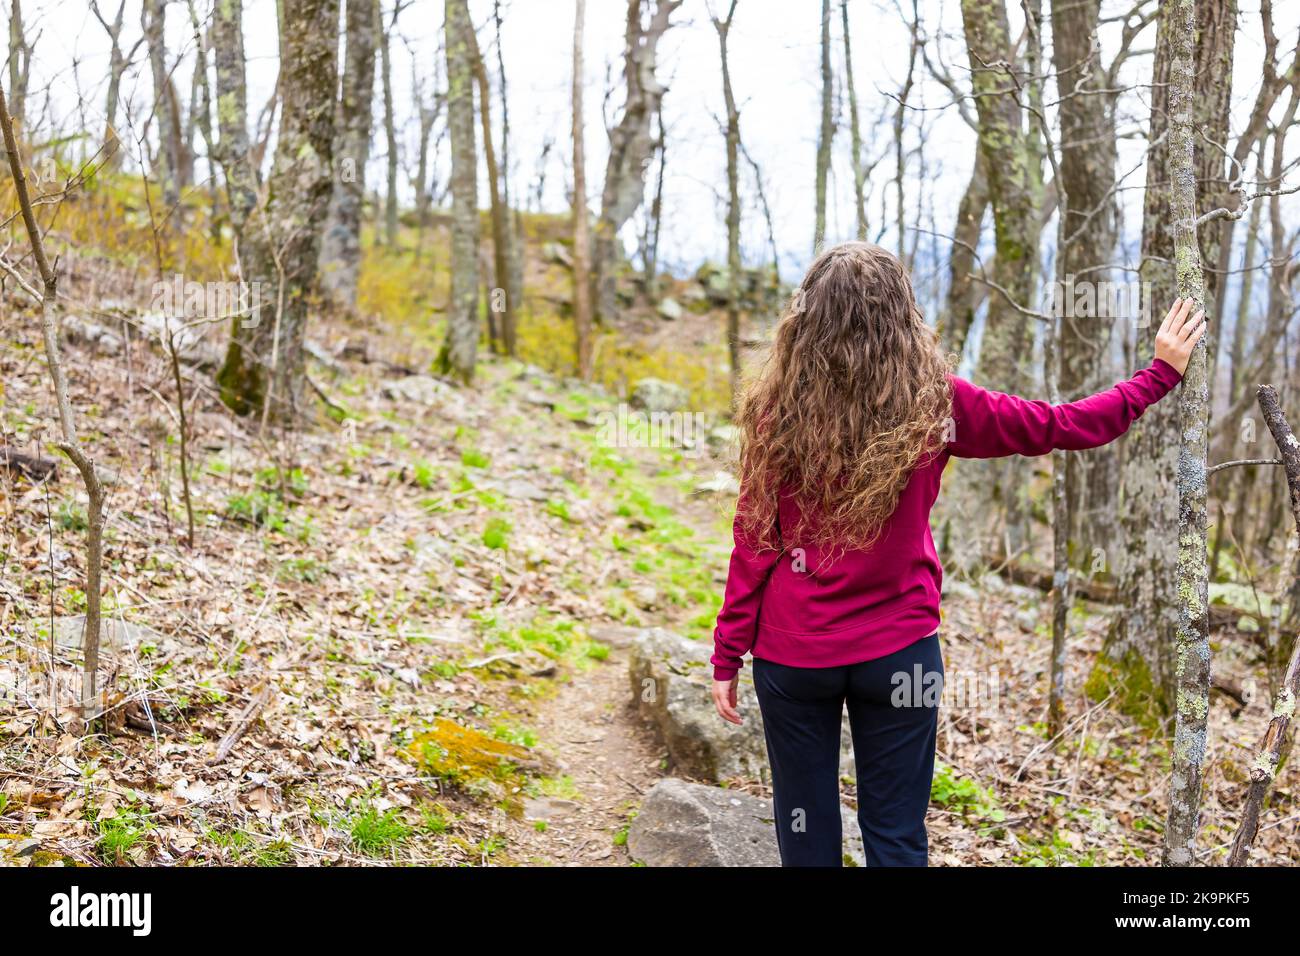 One lonely woman standing leaning against bare tree trunk in forest on Devil's knob hiking woods trail in Wintergreen ski resort, Virginia Stock Photo